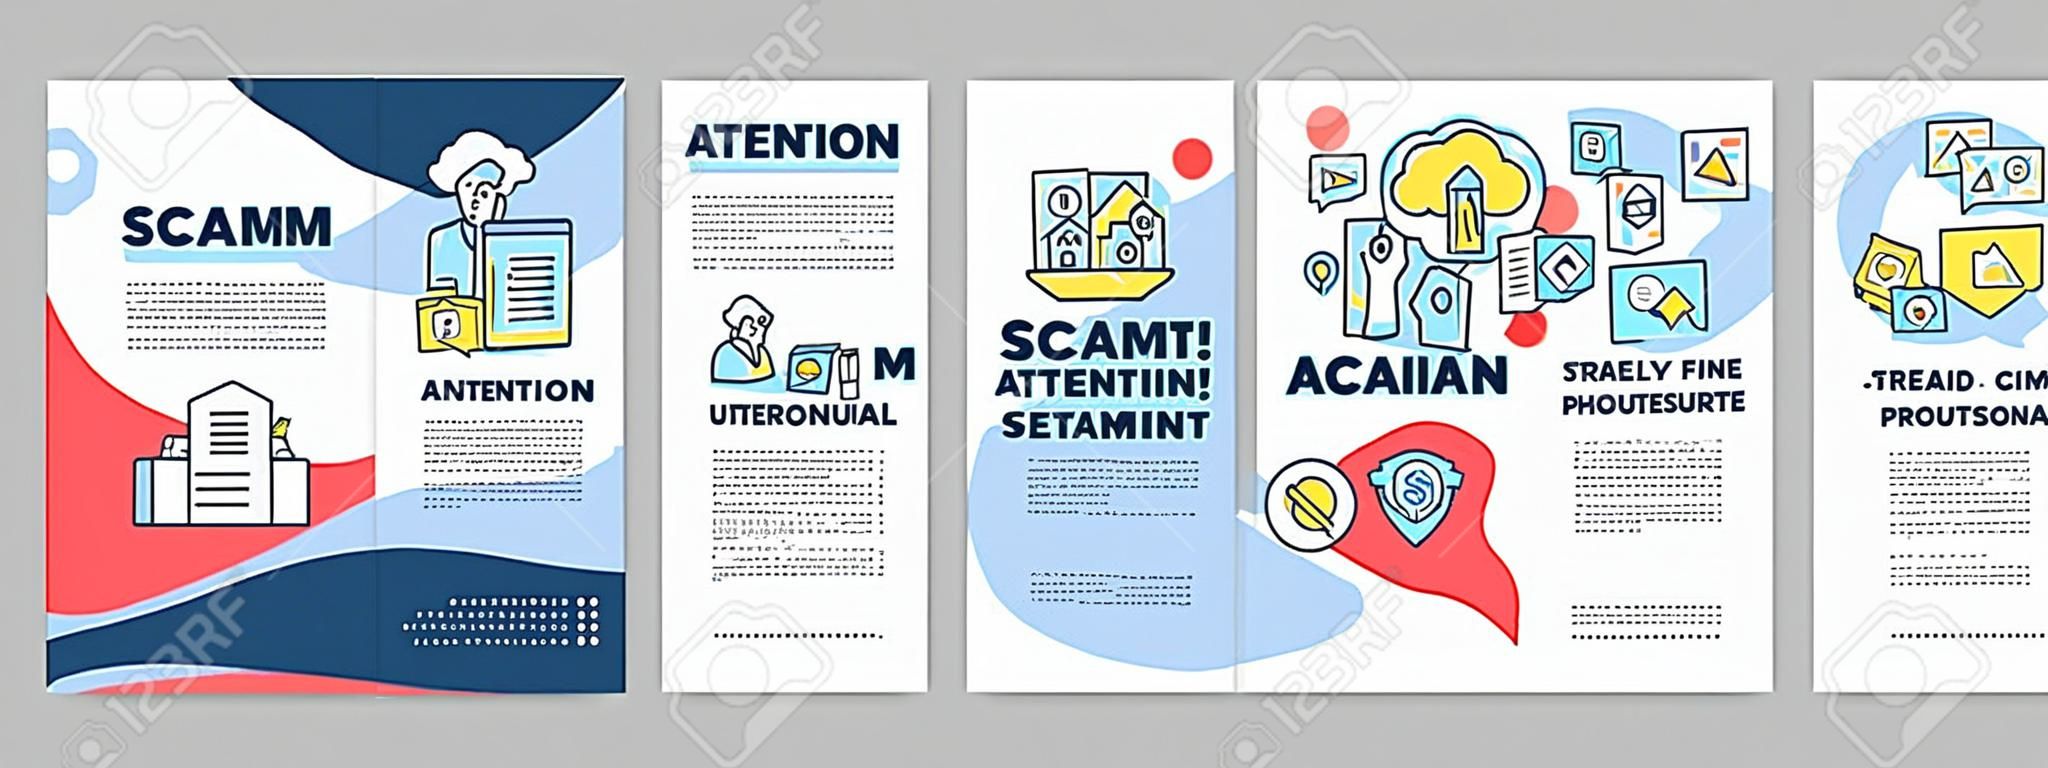 Attention scam brochure template. Fraud warning flyer, booklet, leaflet, cover design with linear illustrations. Stealing info. Internet crime. Vector page layouts for magazines, advertising posters